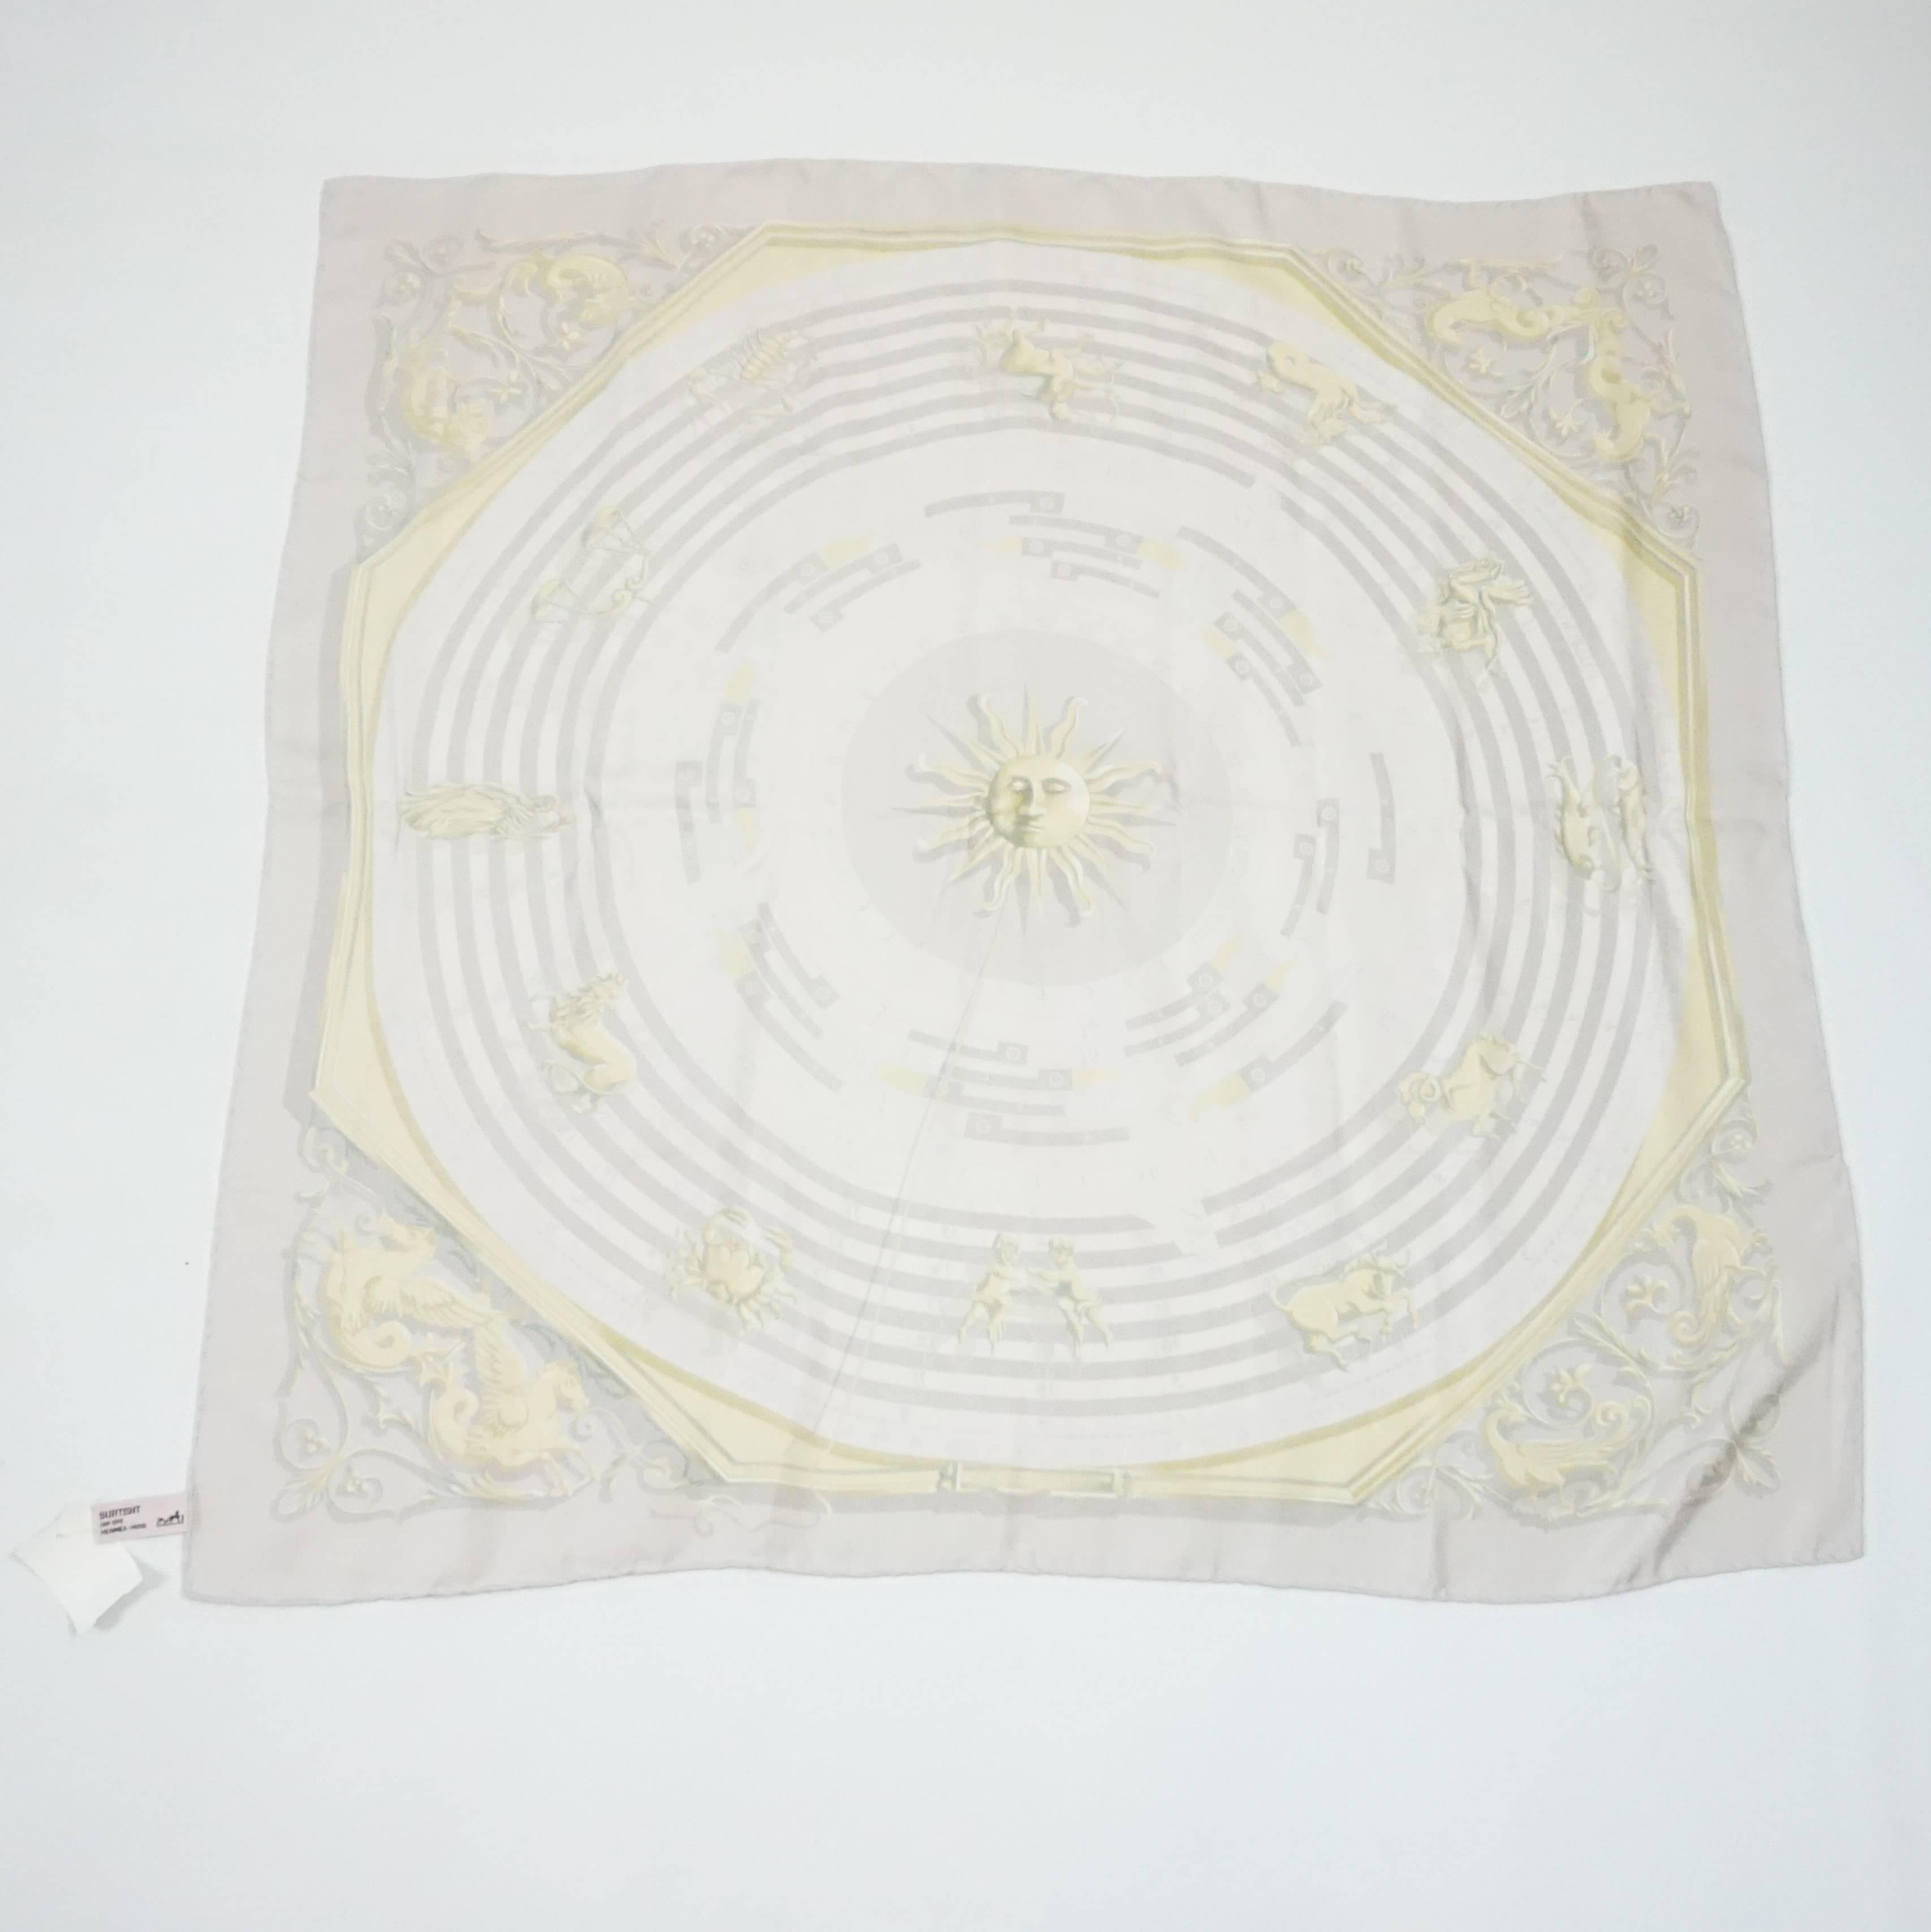 This Hermes scarf is a light, pale lavender with a golden astrology and sun print. The title is 